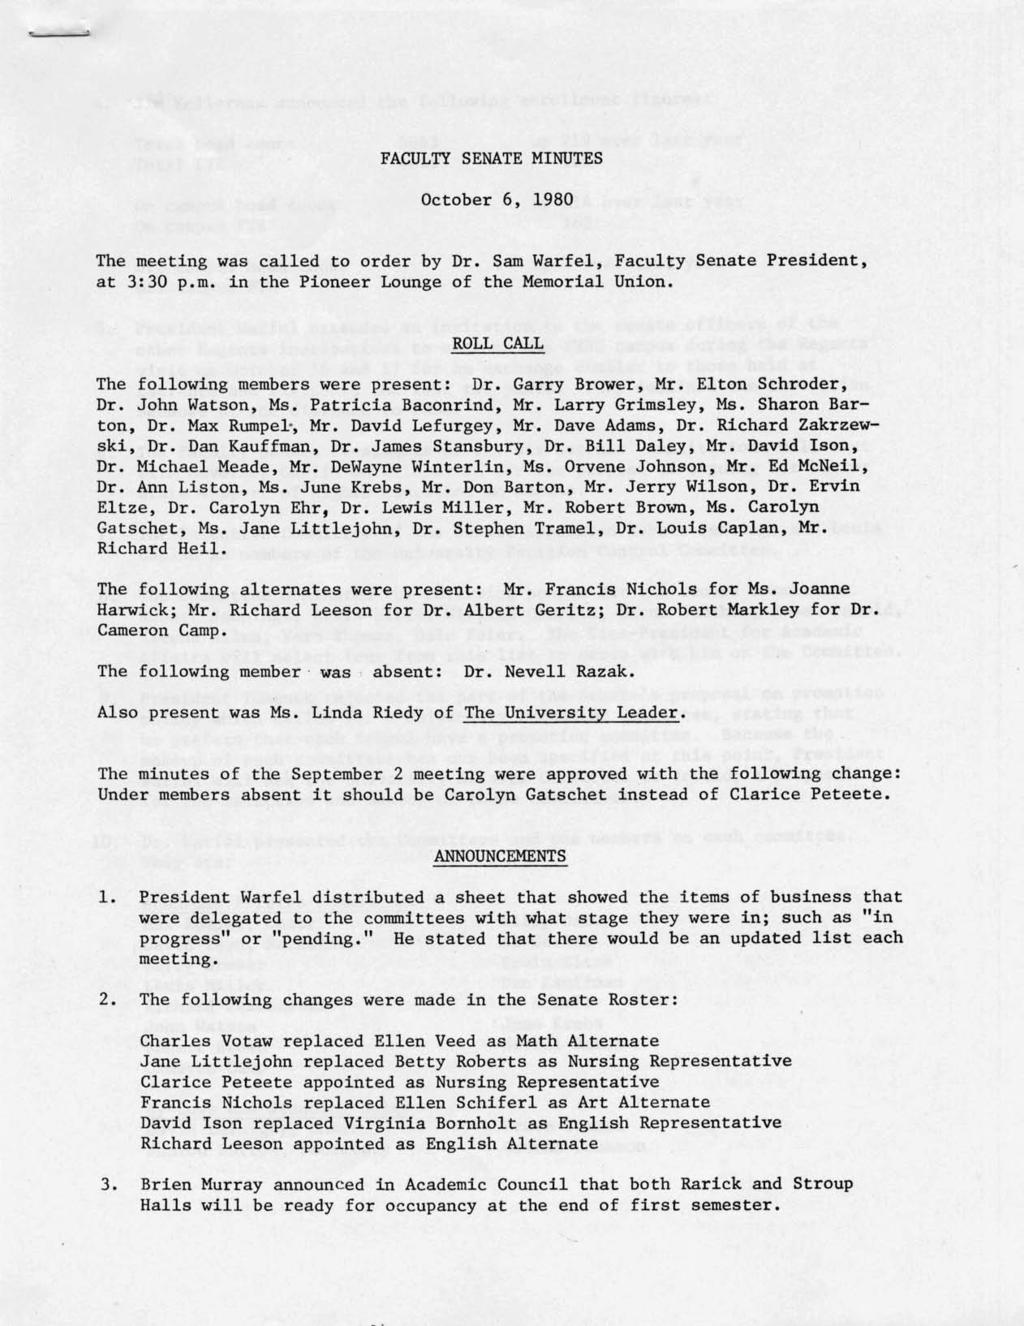 FACULTY SENATE MINUTES October 6, 1980 The meeting was called to order by Dr. Sam Warfel, Faculty Senate President, at 3:30 p.m. in the Pioneer Lounge of the Memorial Union.